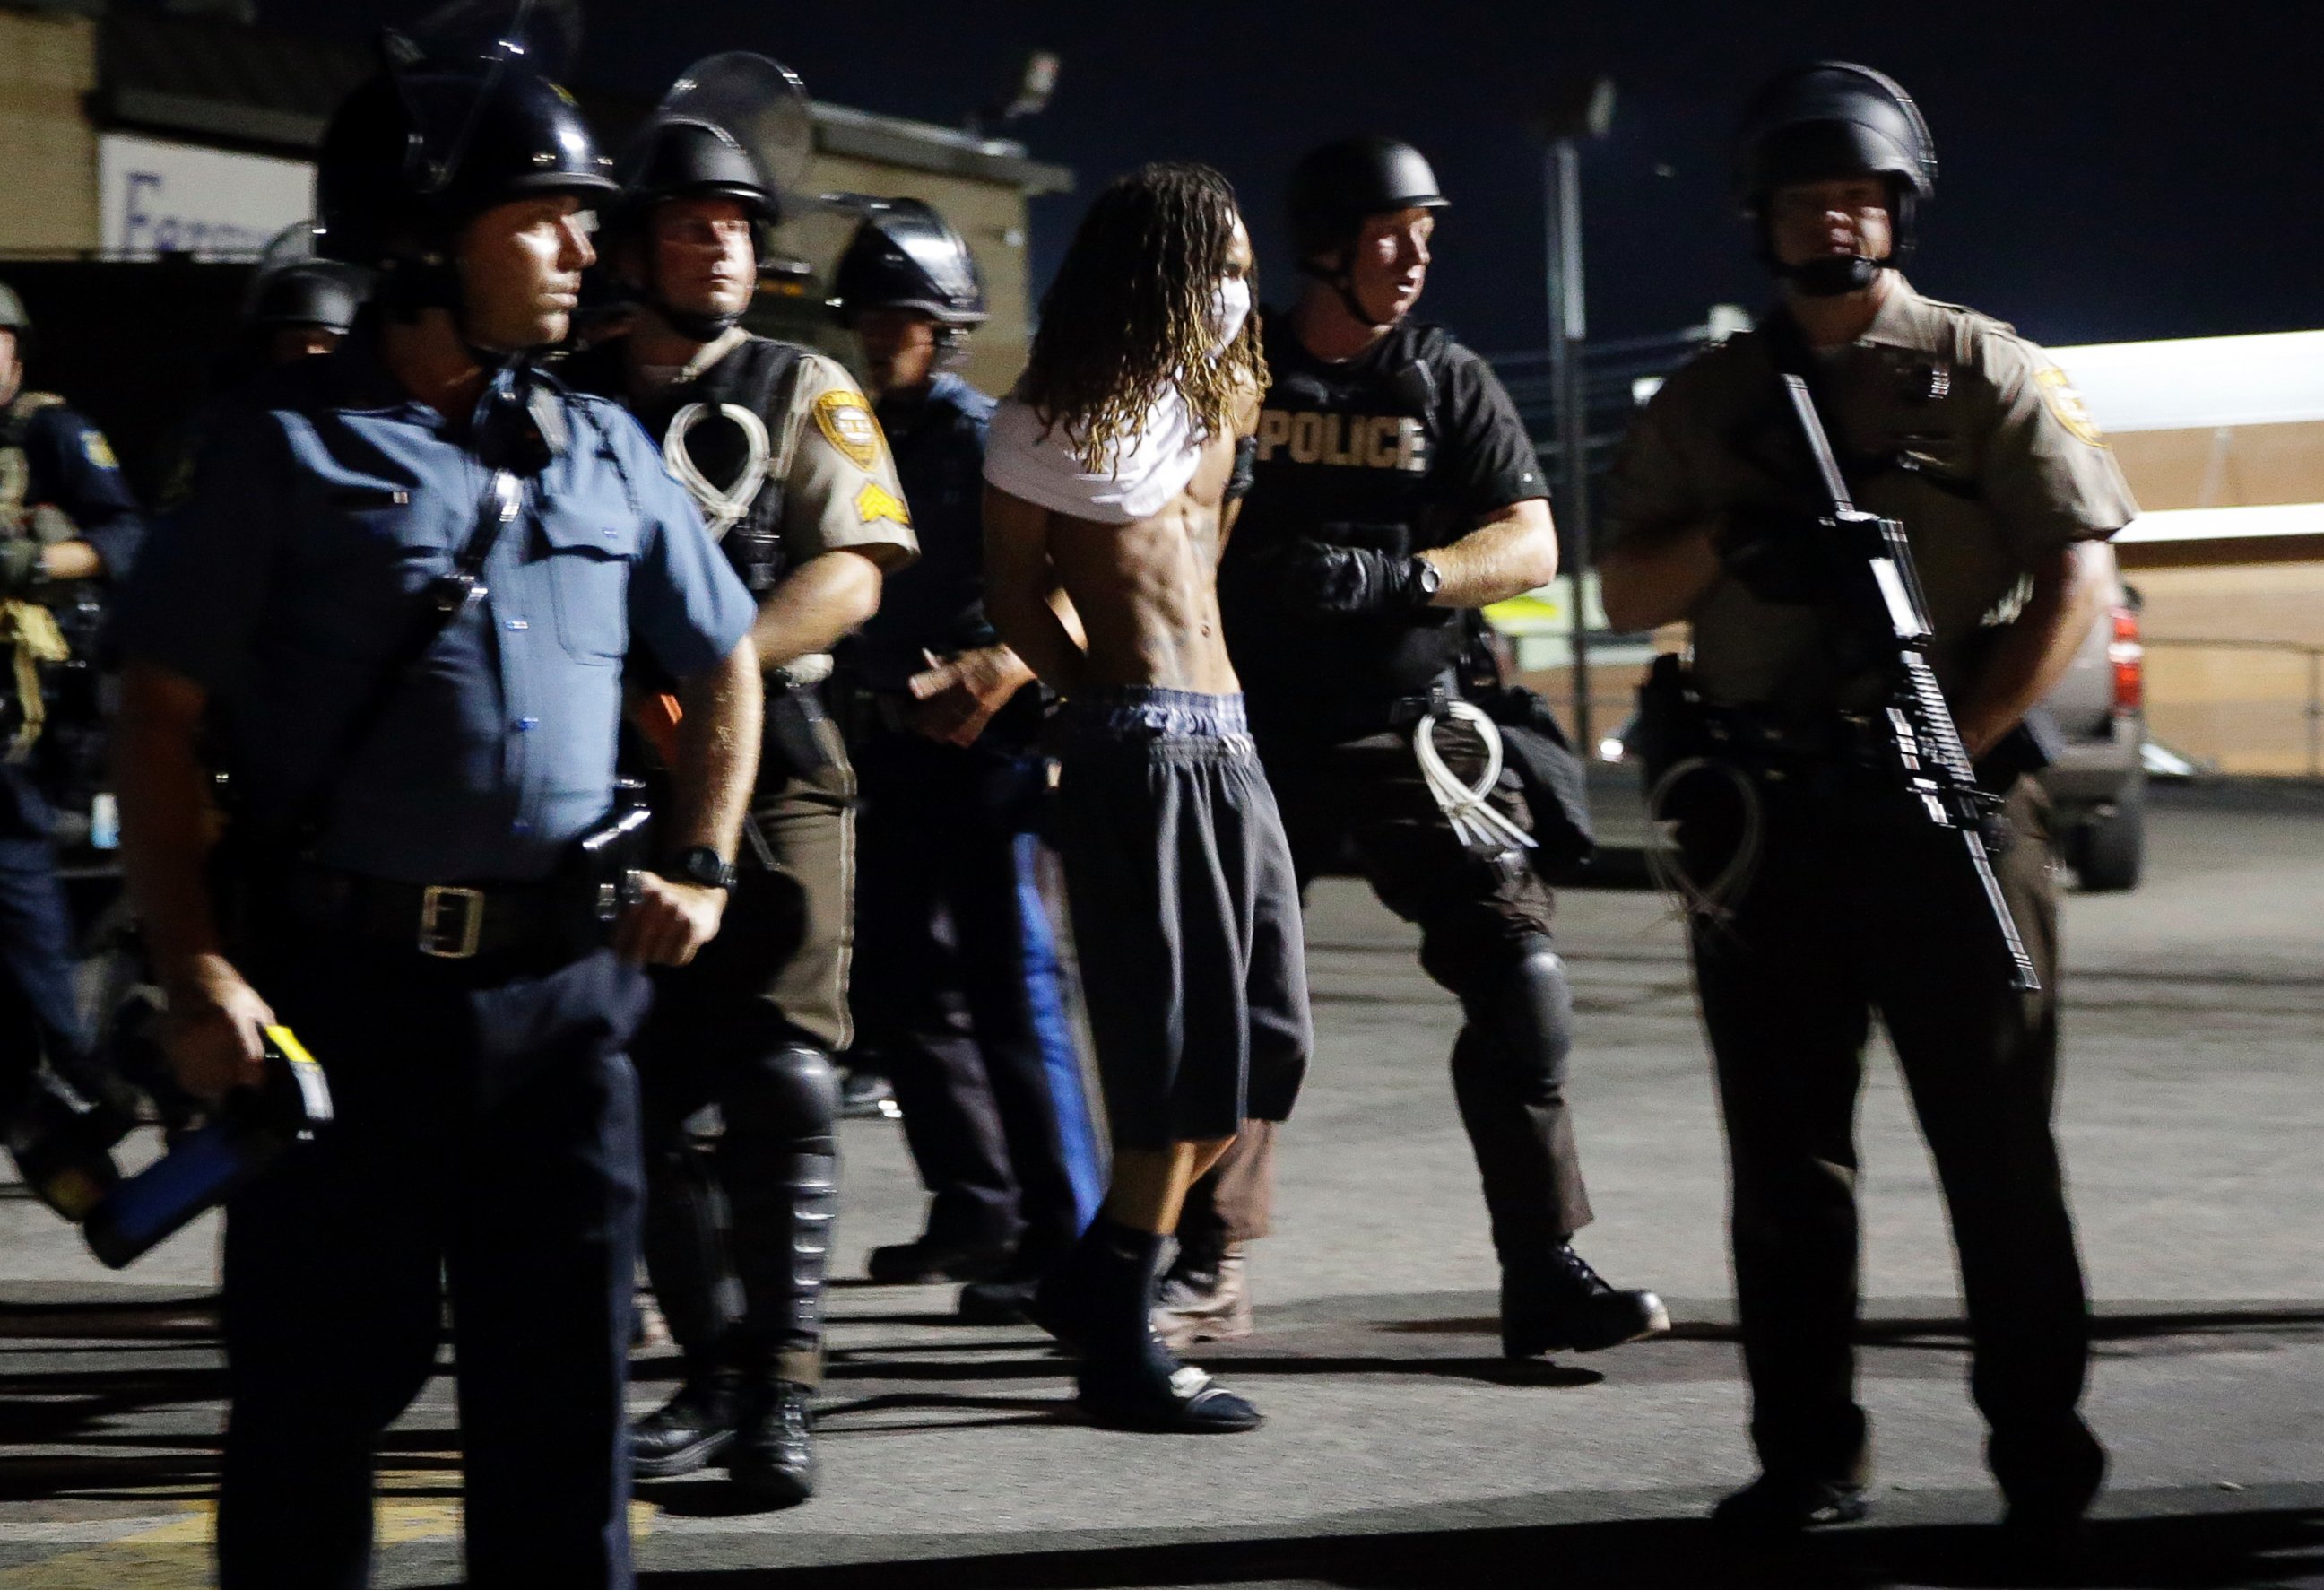 PHOTO: A man is arrested as police try to disperse a crowd in Ferguson, Mo., Aug. 20, 2014.